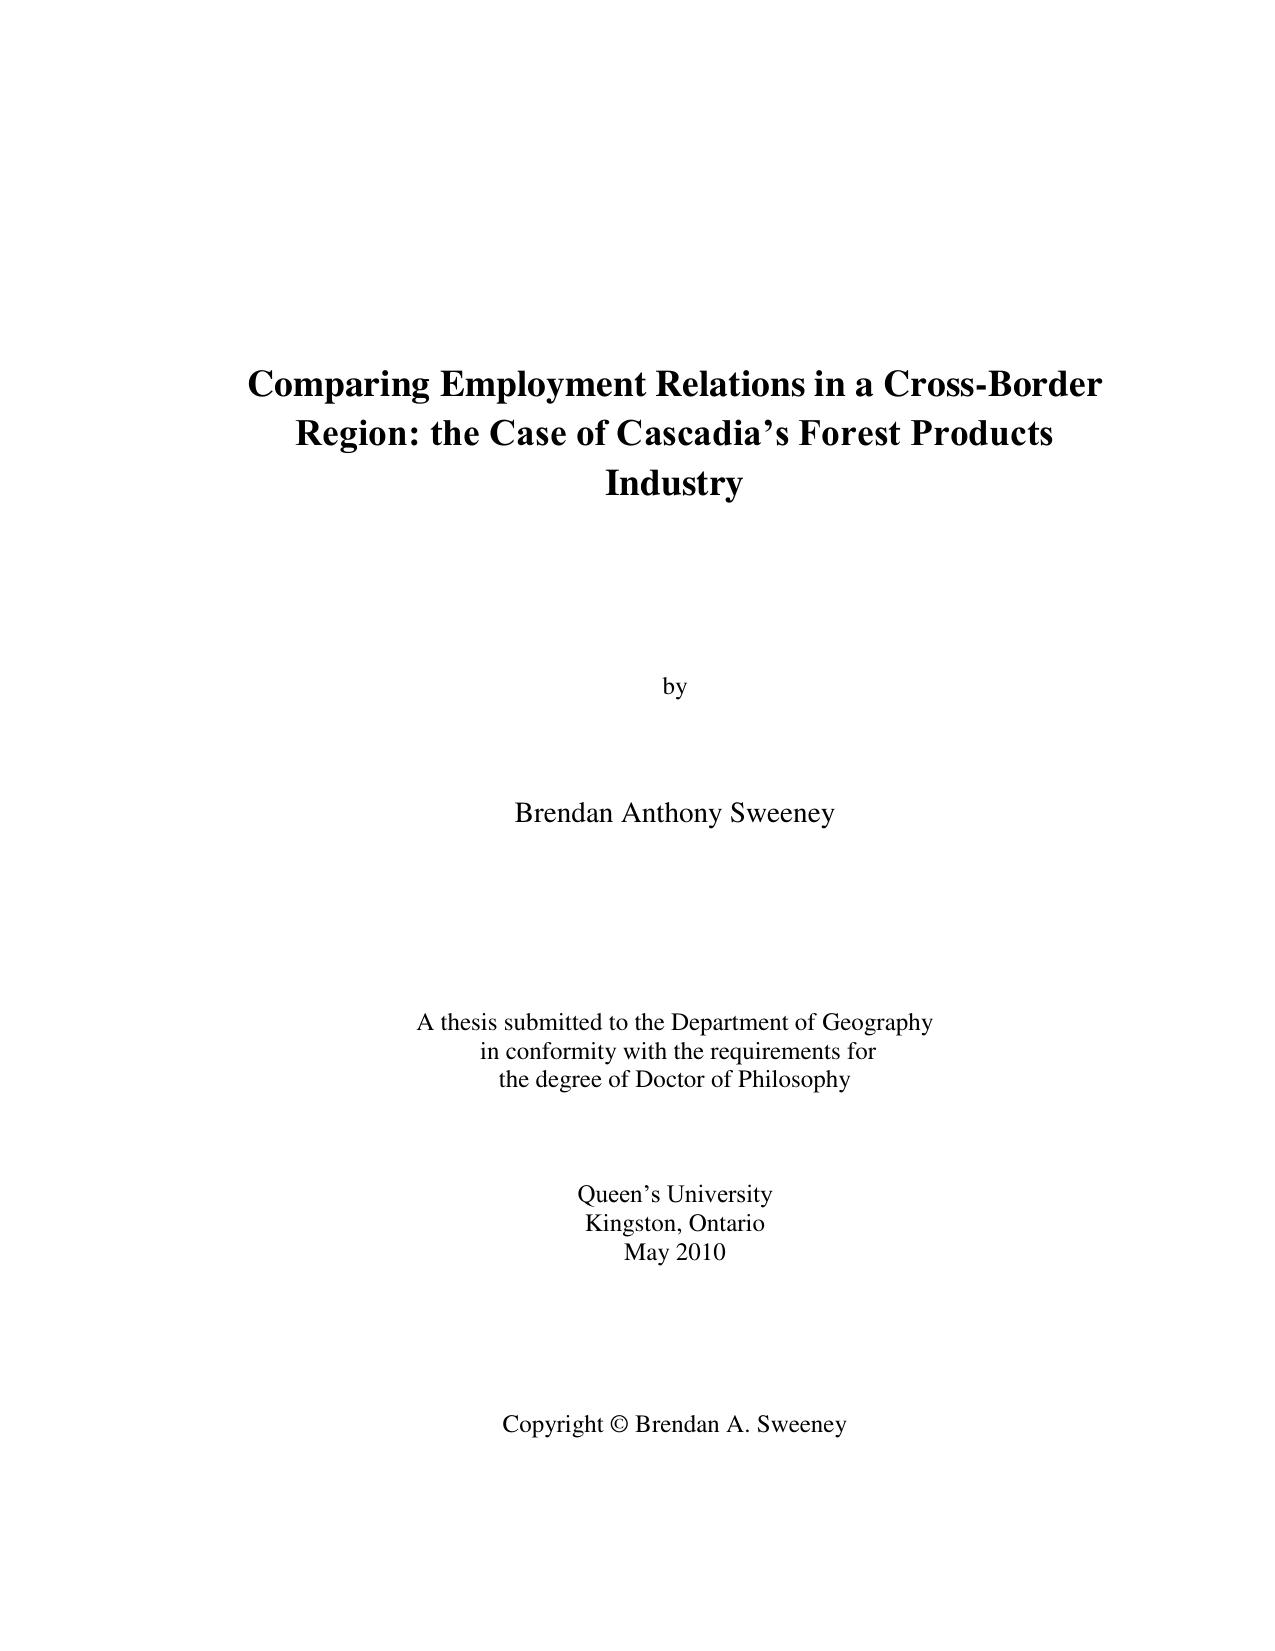 Comparing Employment Relations in a Cross-Border Region